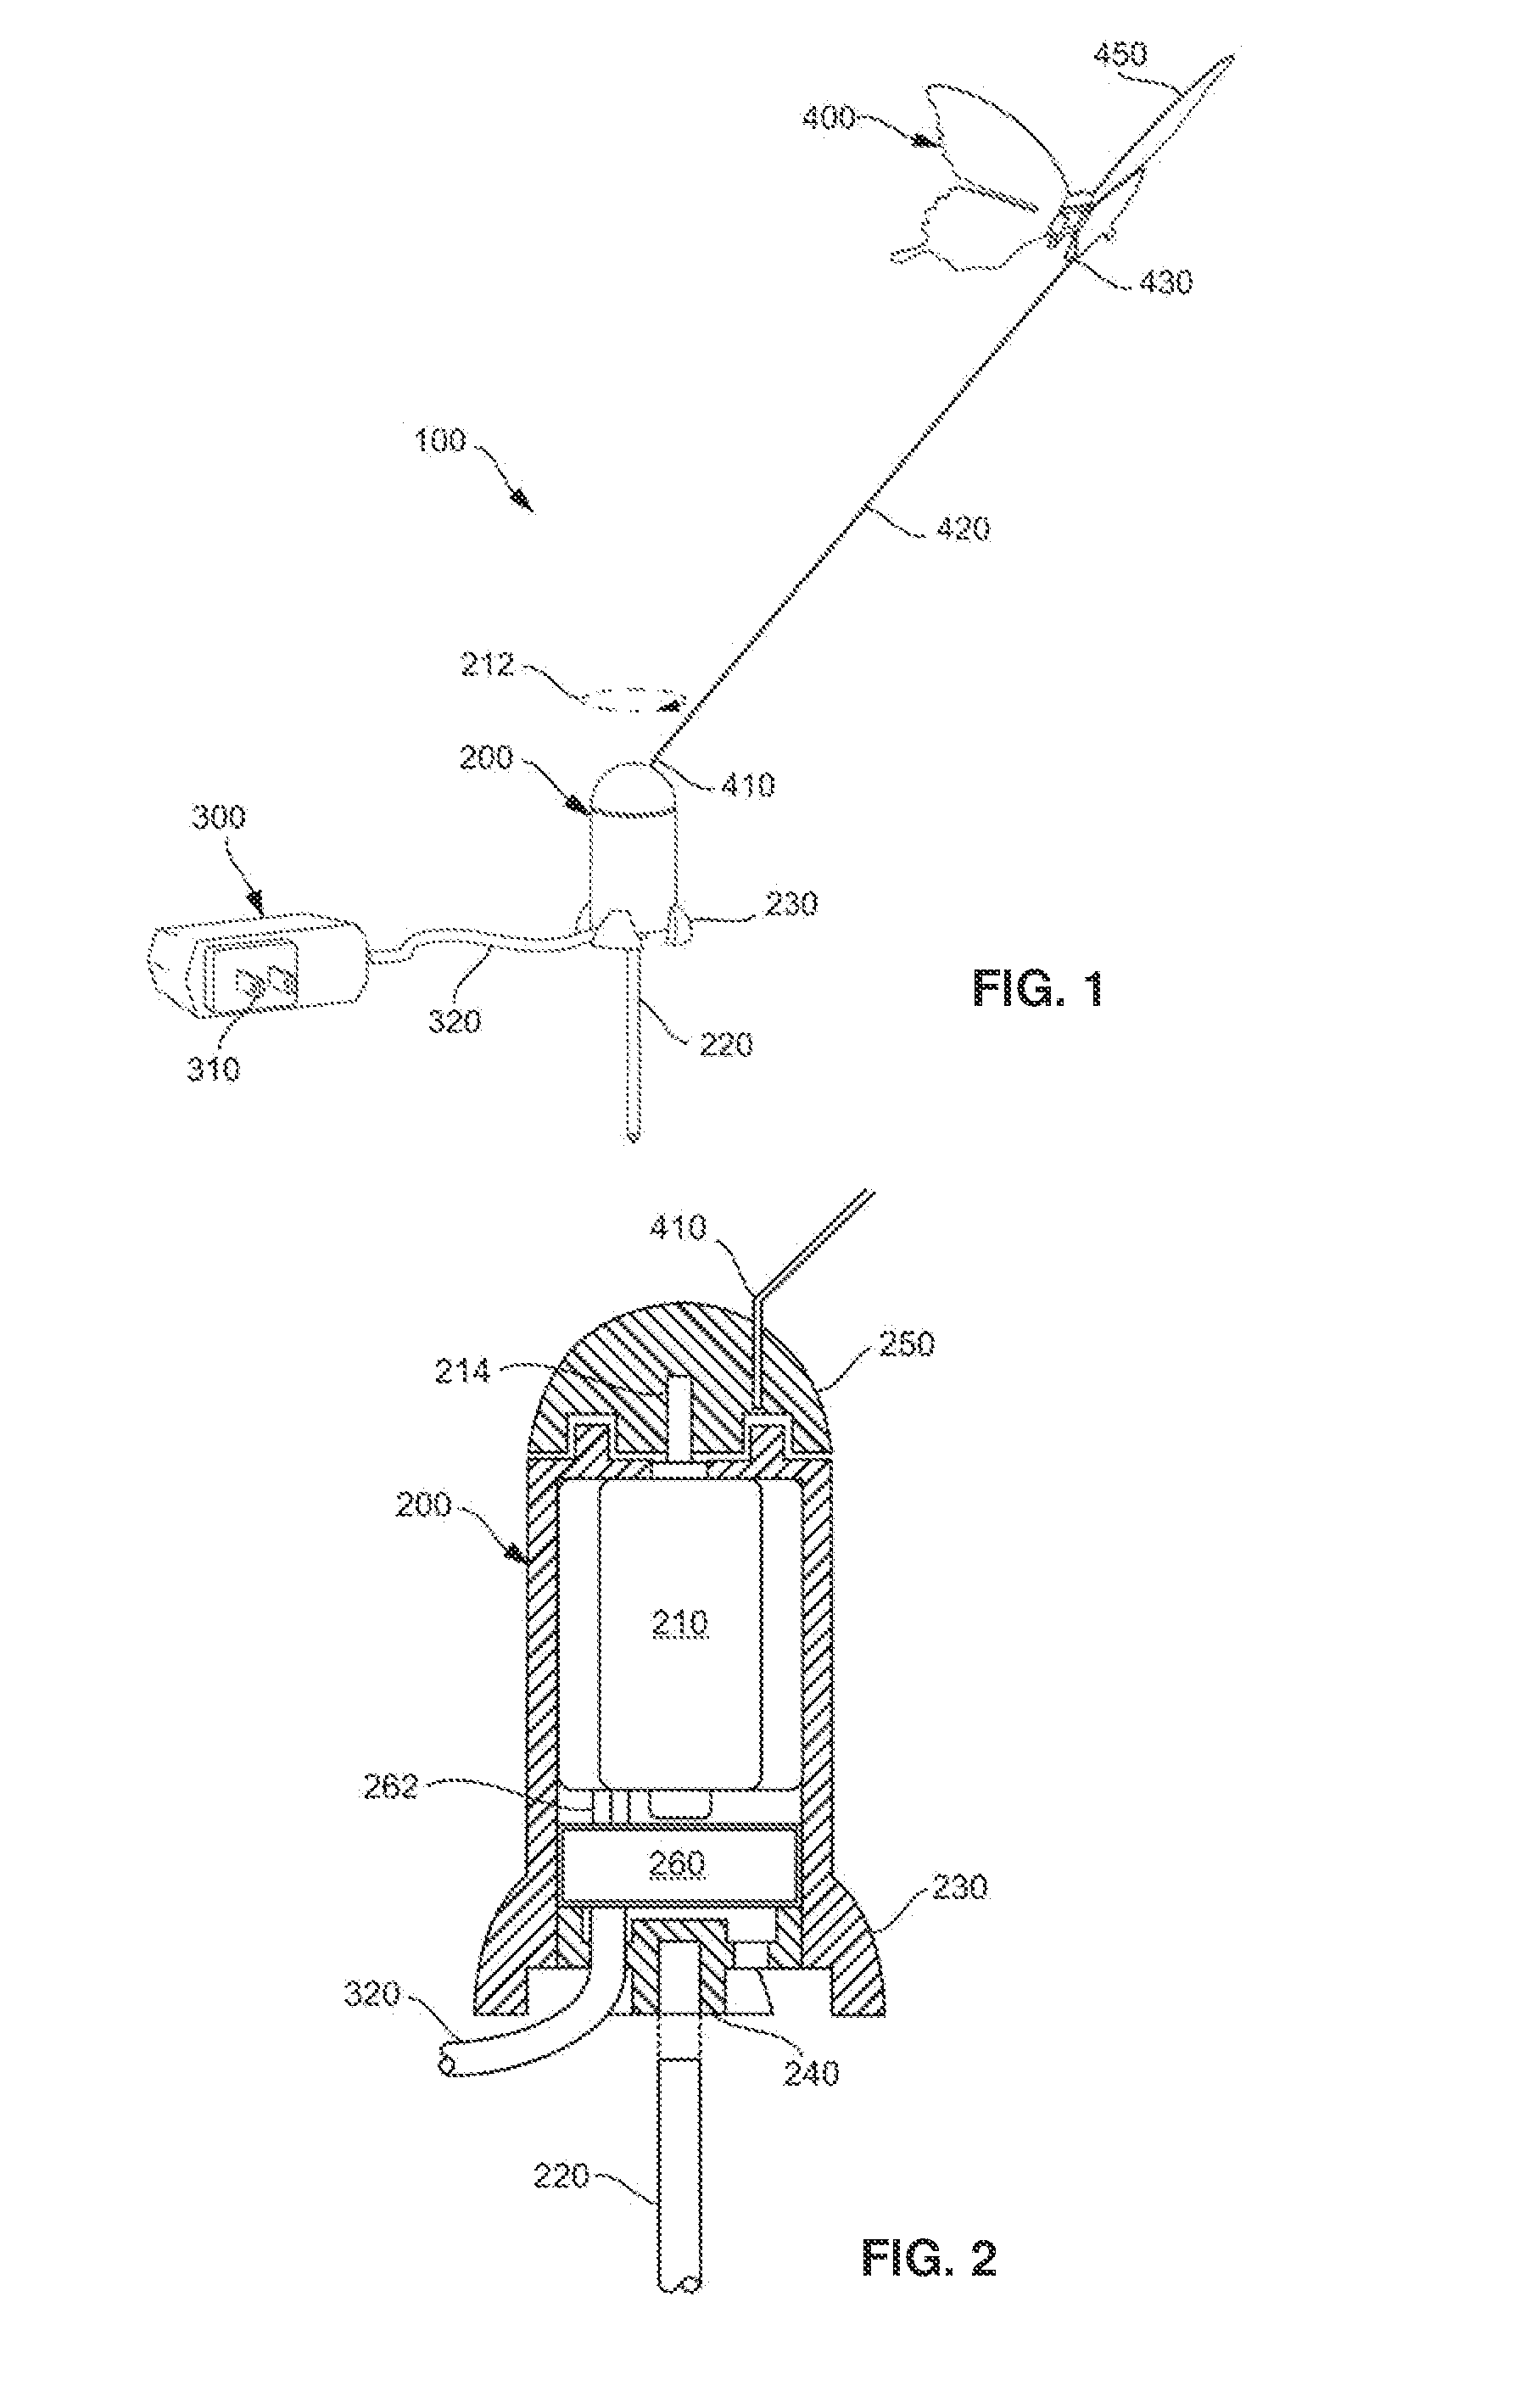 Electrically propelled display device with simulated hovering and/or flying patterns